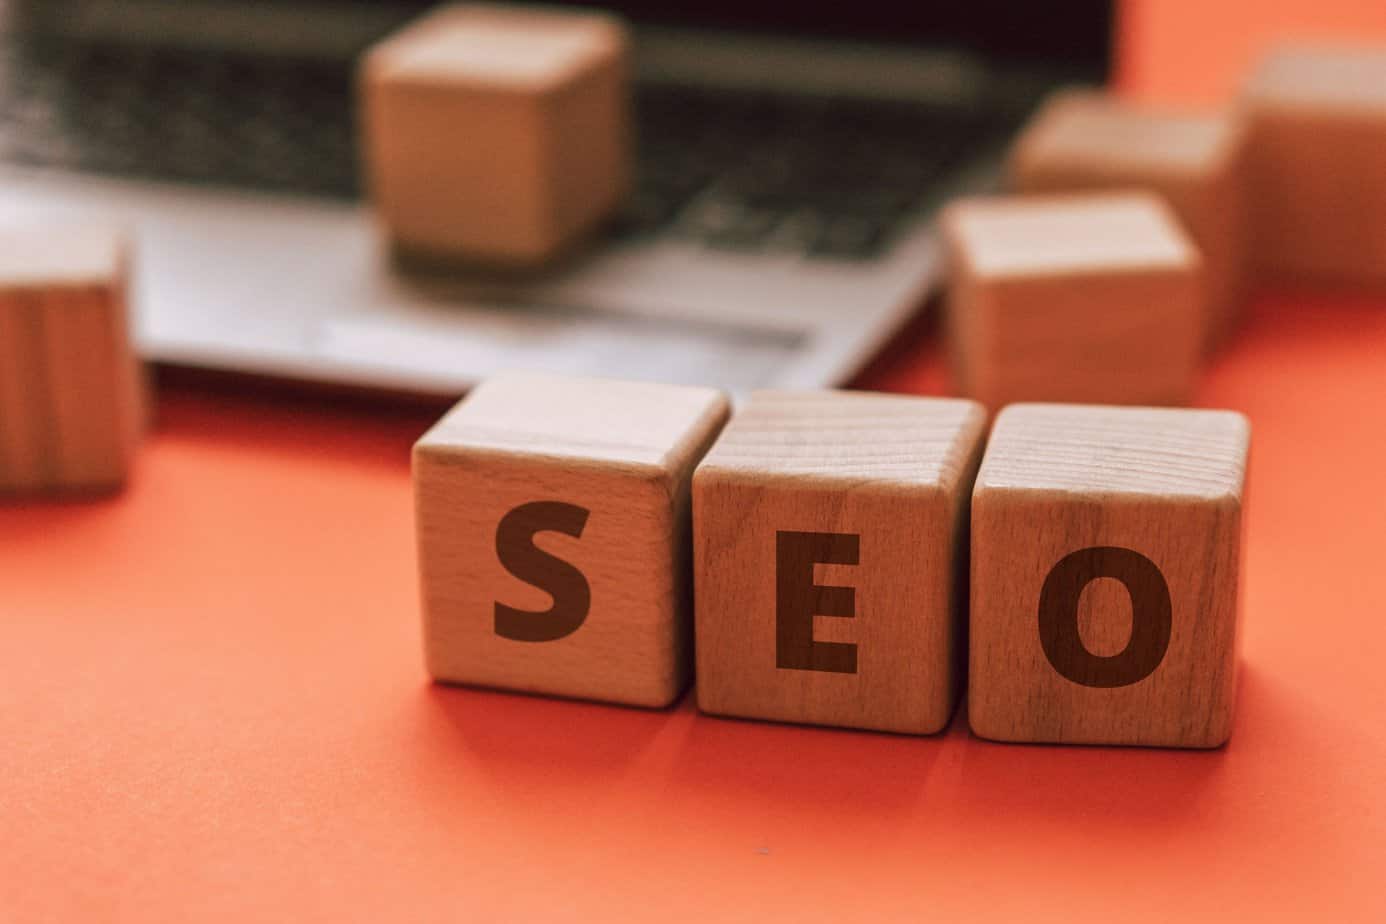 Myths about SEO you need to stop believing